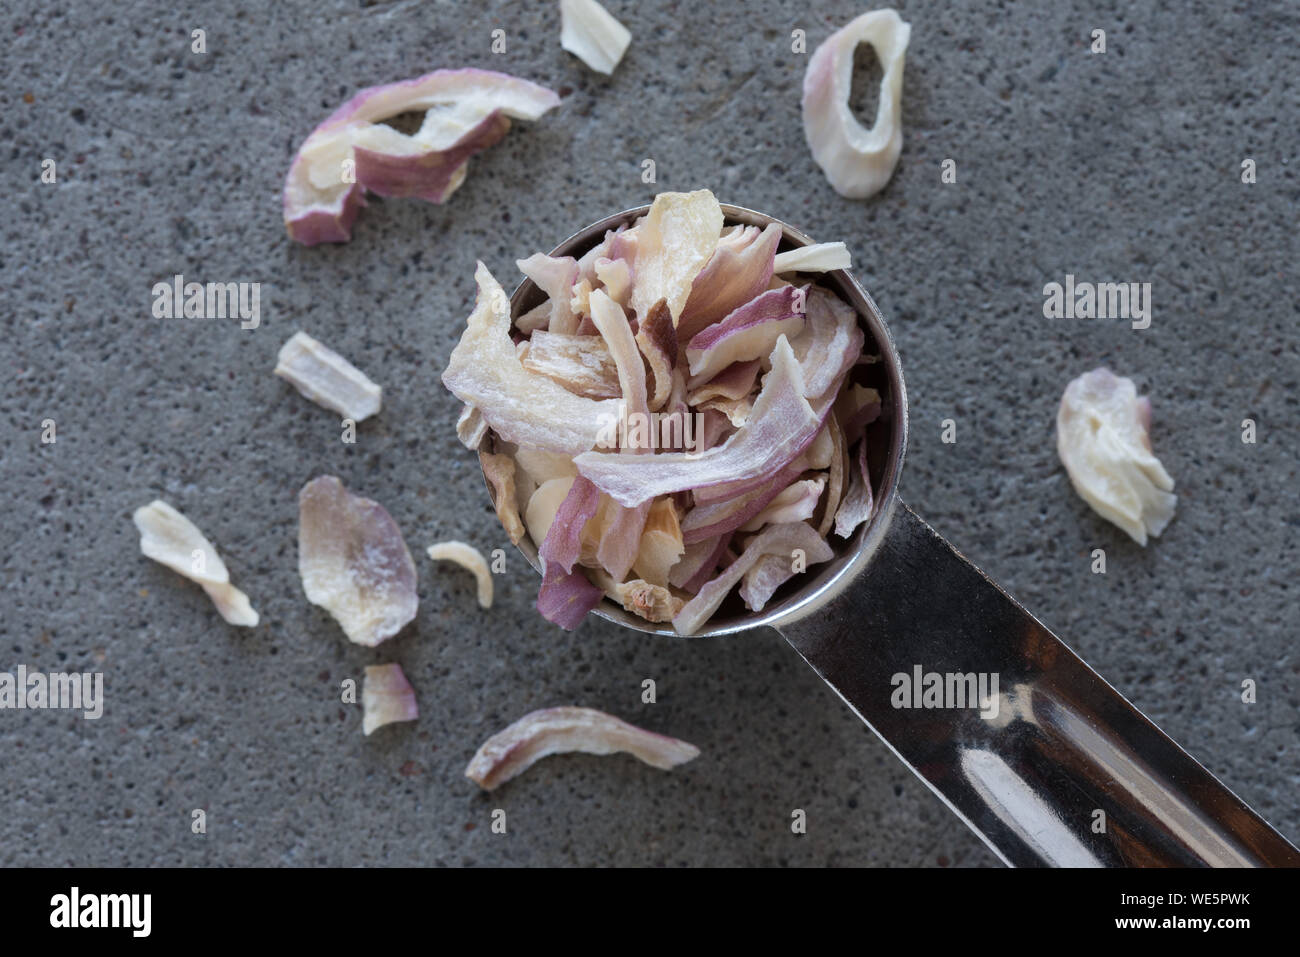 High Angle View Of Onion In Teaspoon Stock Photo